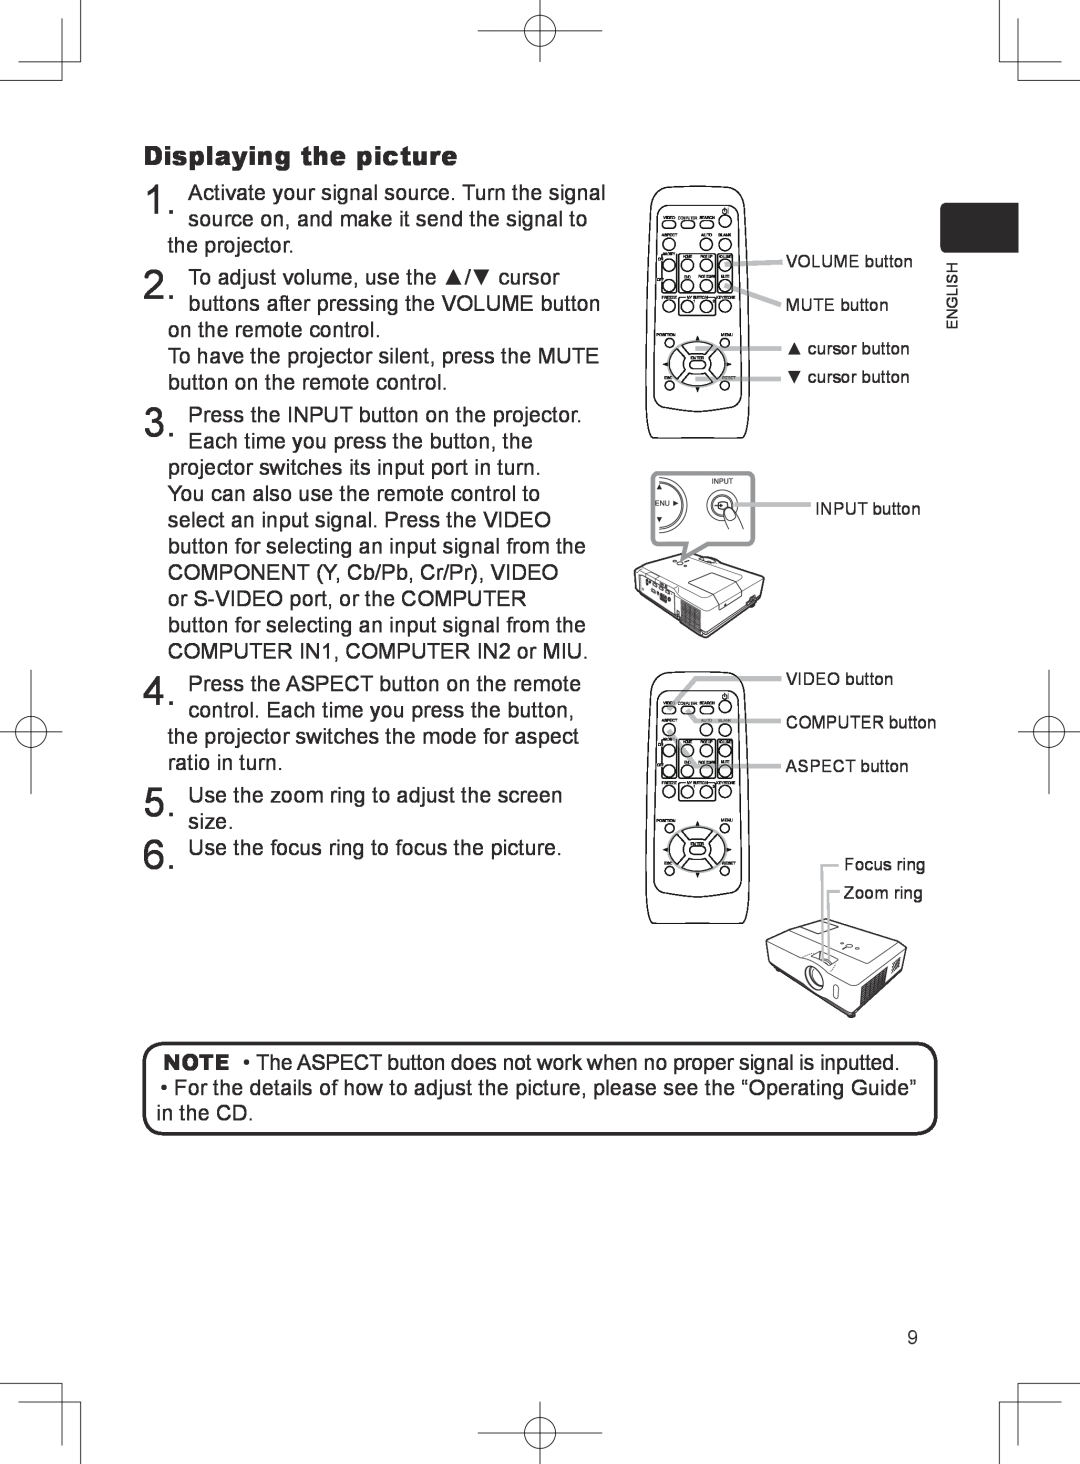 Dukane 8781 user manual Displaying the picture 